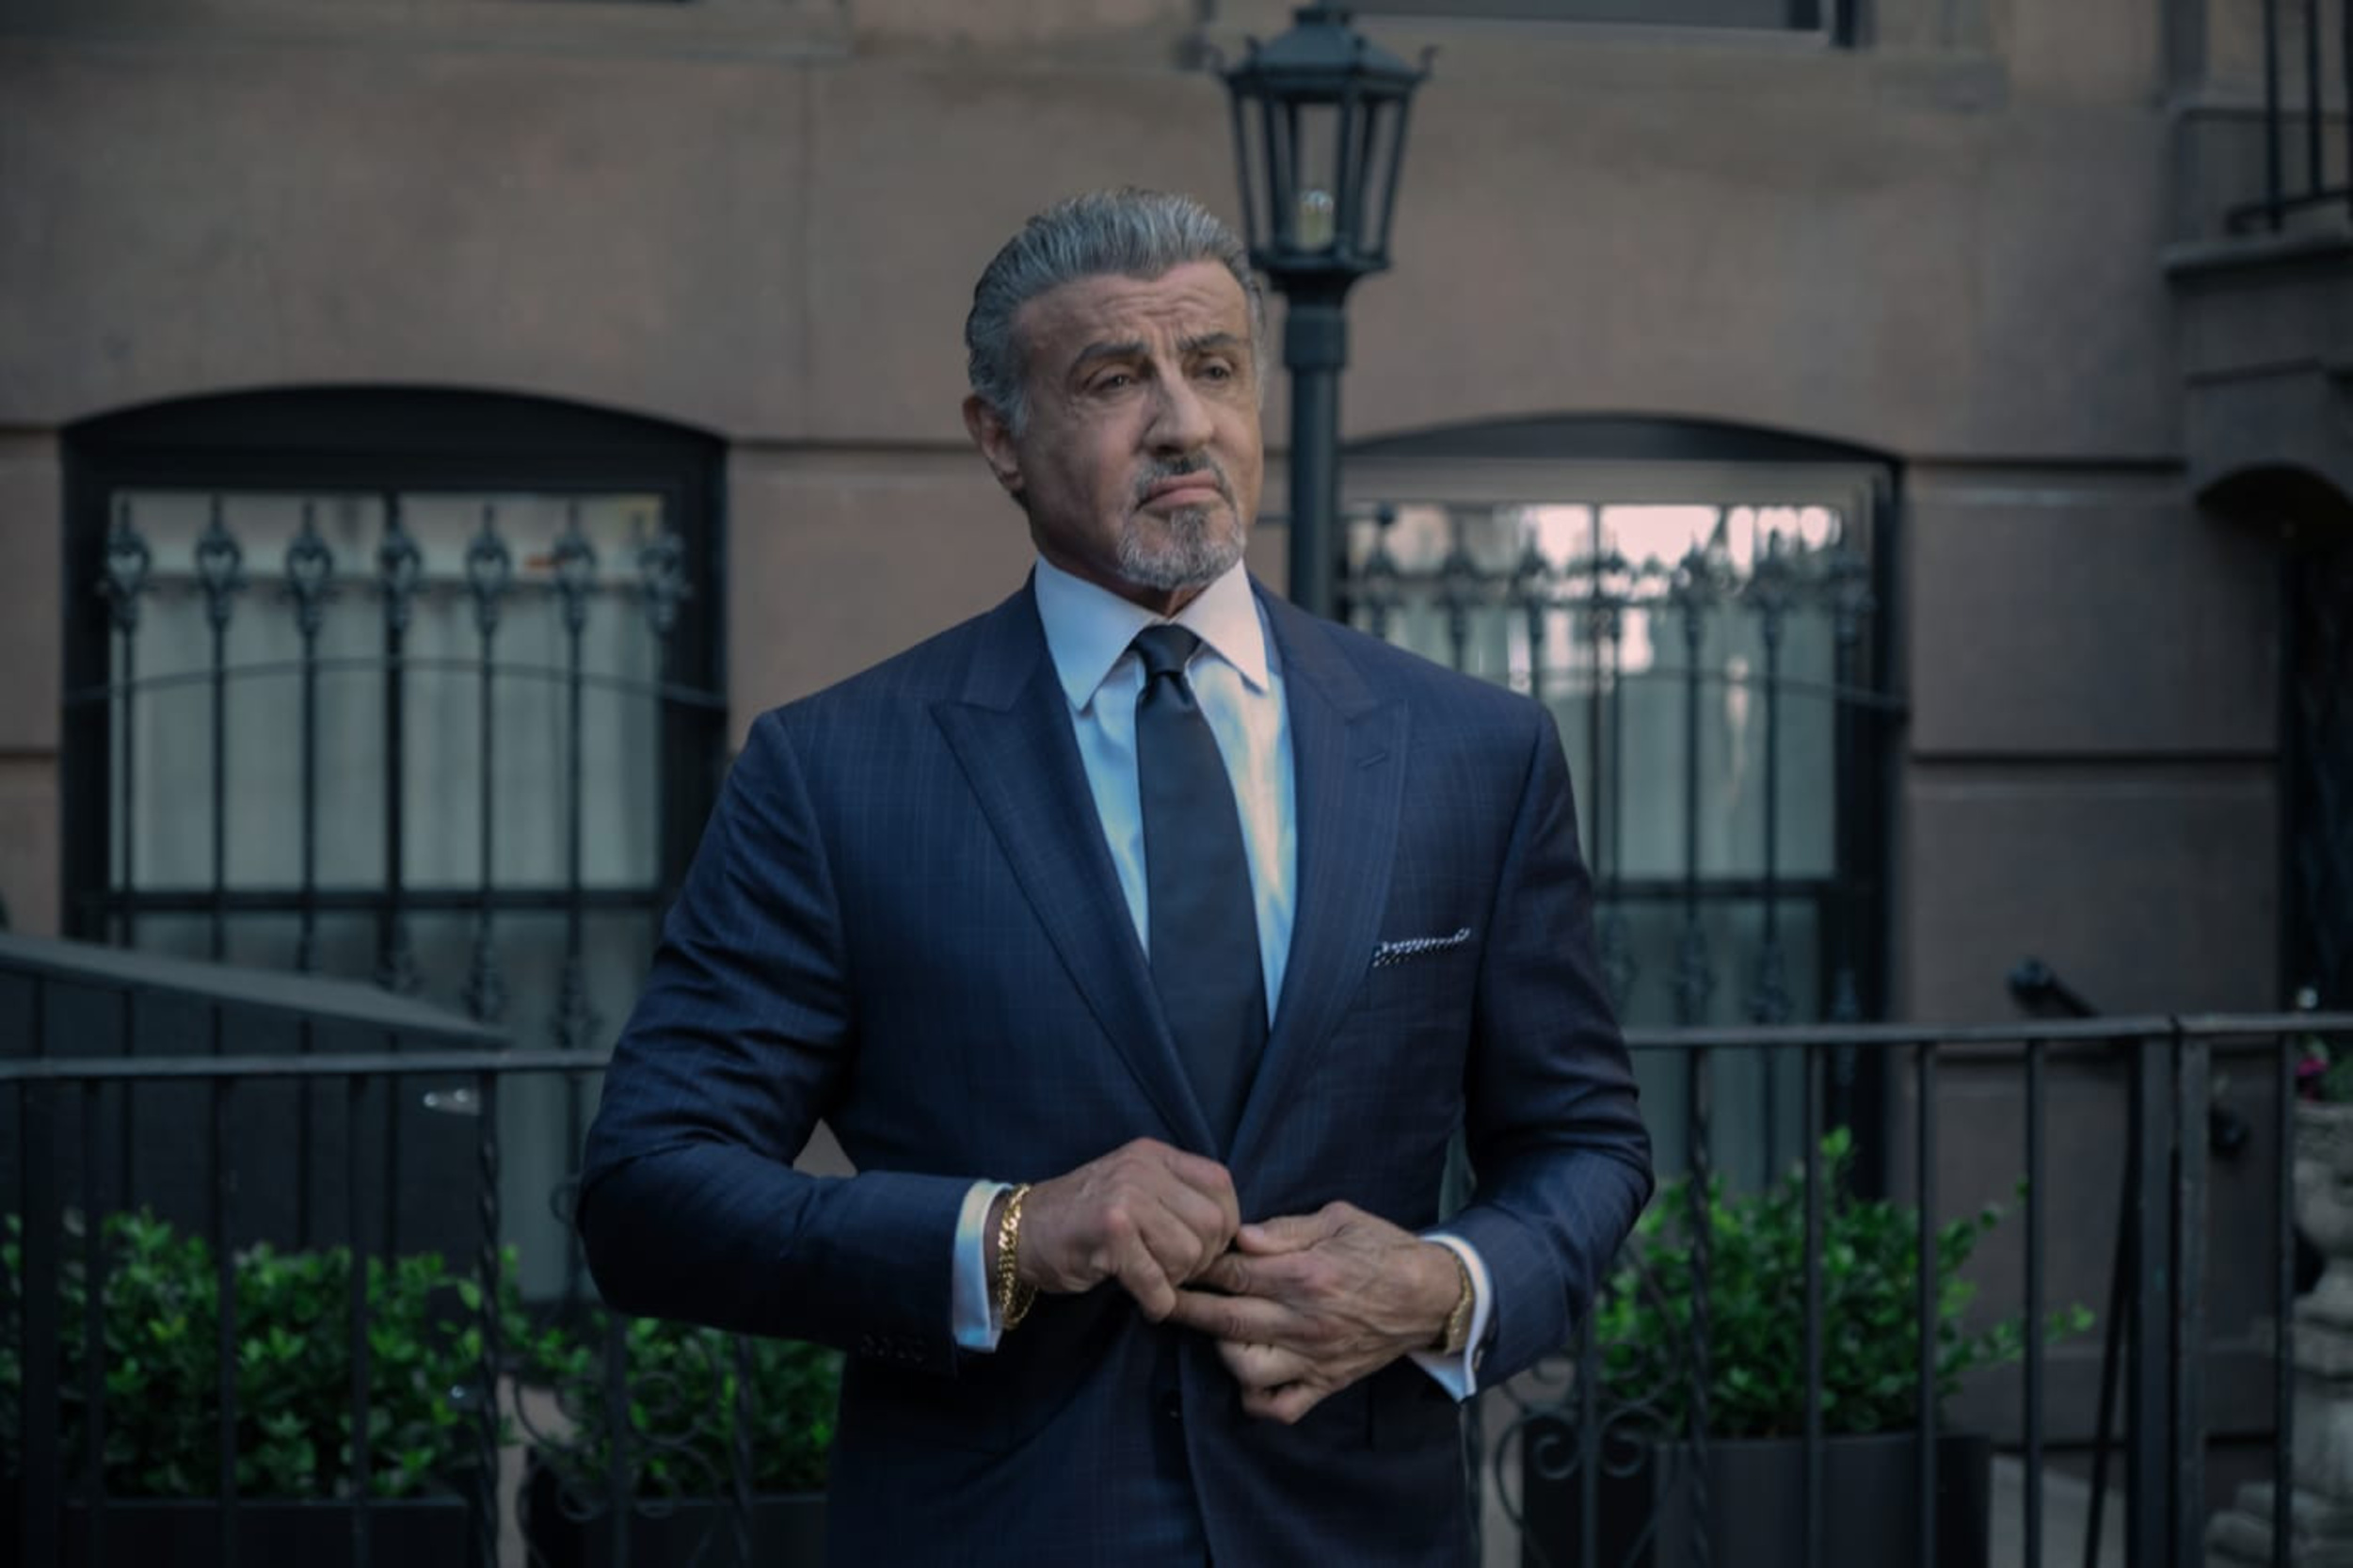 <p>Stallone did what he could to keep on extending his movie career. There was "Creed," the "Expendables" films, and even another "Rambo" movie. Now, though, even Rocky Balboa is doing the TV thing. He's the star of Paramount+'s "Tulsa King."</p><p><a href='https://www.msn.com/en-us/community/channel/vid-cj9pqbr0vn9in2b6ddcd8sfgpfq6x6utp44fssrv6mc2gtybw0us'>Did you enjoy this slideshow? Follow us on MSN to see more of our exclusive entertainment content.</a></p>